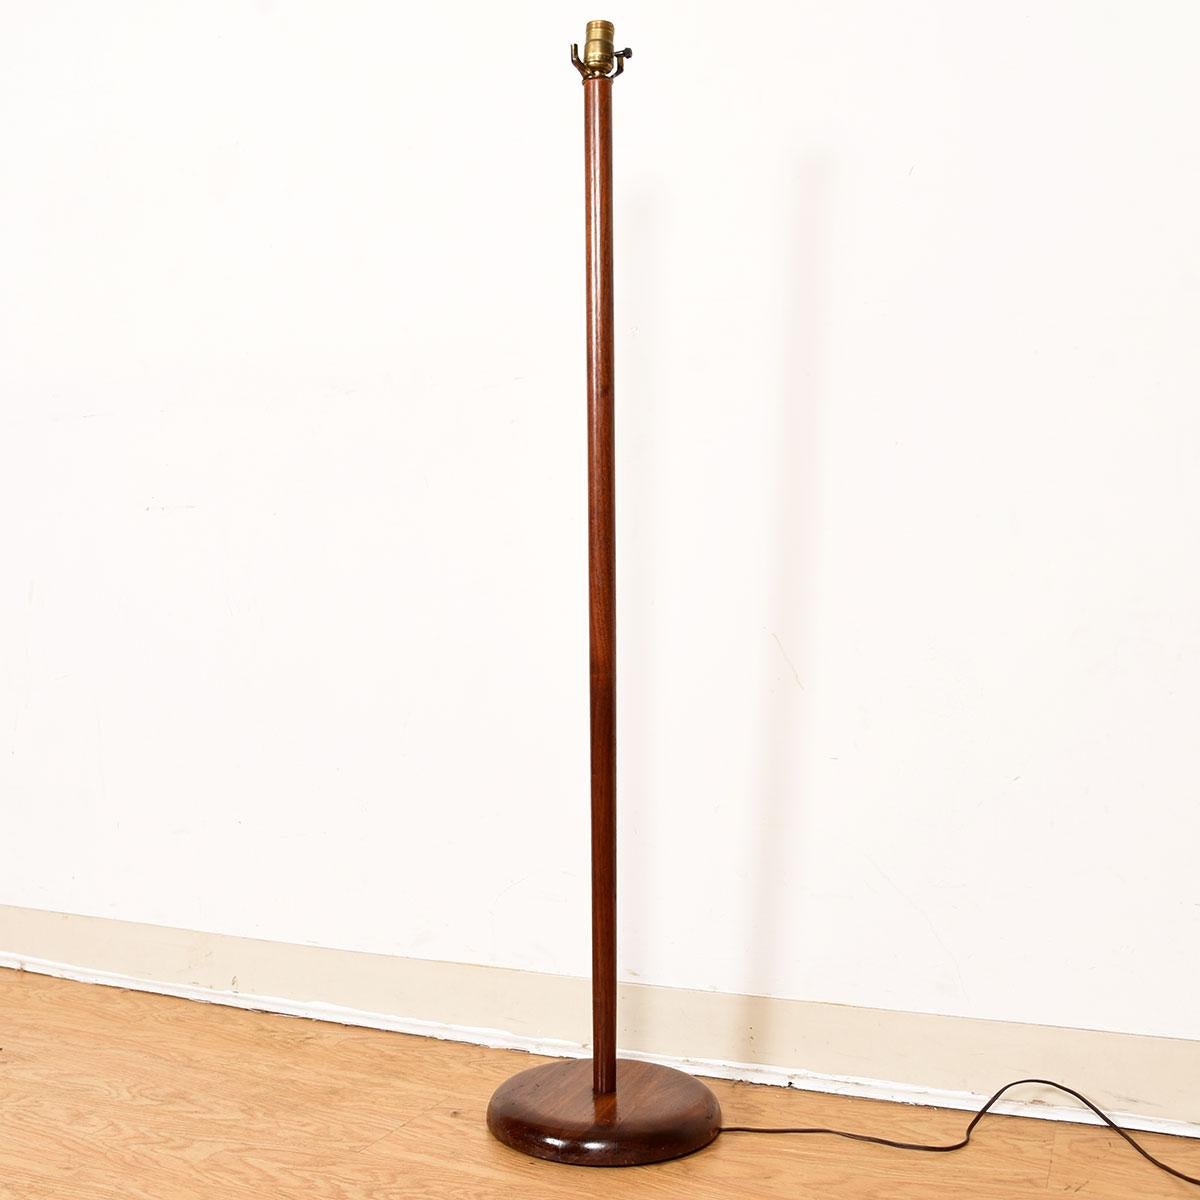 Danish Modern Teak Floor Lamp

Additional information:
Material: Teak
Featured at Kensington
Shade is not included

Dimension: Ø 10.25? x H 48? (to top of shade)